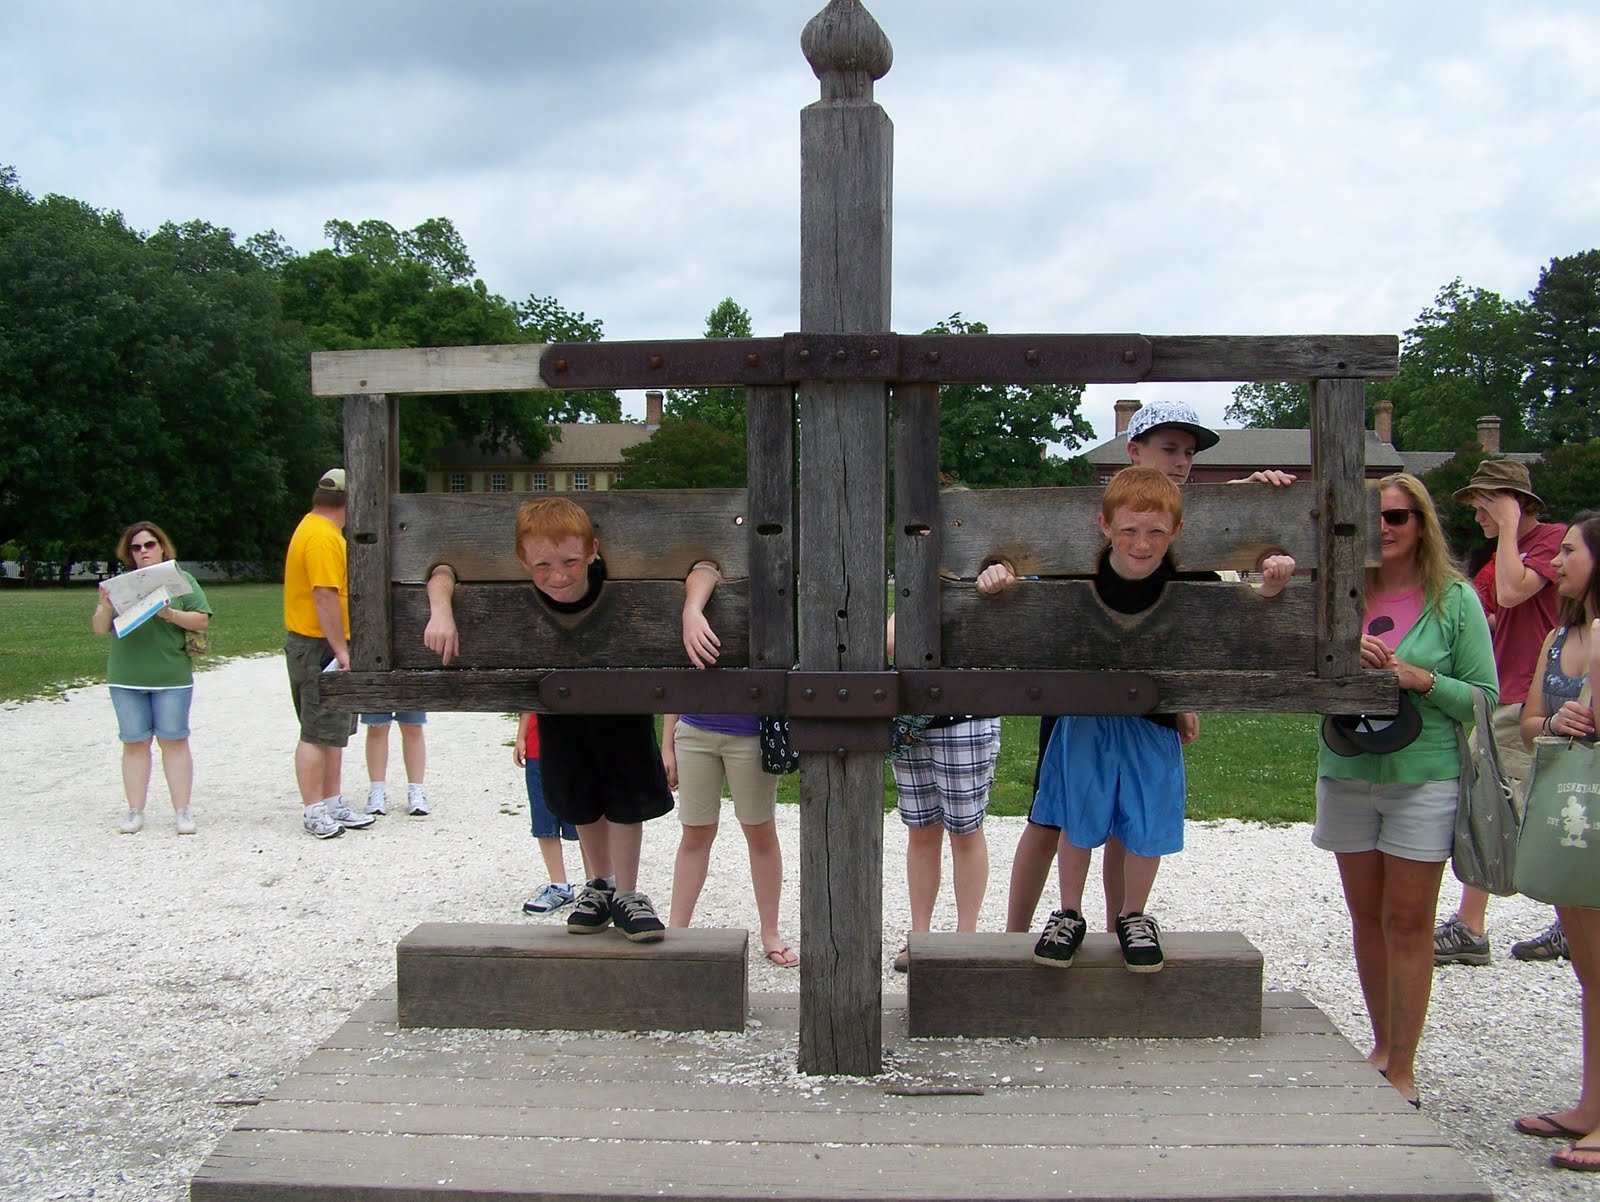 Pillory Torture - The pillory was used to publicly humiliate a victim. Even though it was meant as a mild form of punishment, the crowd sometimes made it lethal.The pillory often served as a post for Flagellation. When the victim was restrained with the device, they were completely defenseless and subject to the crowd.